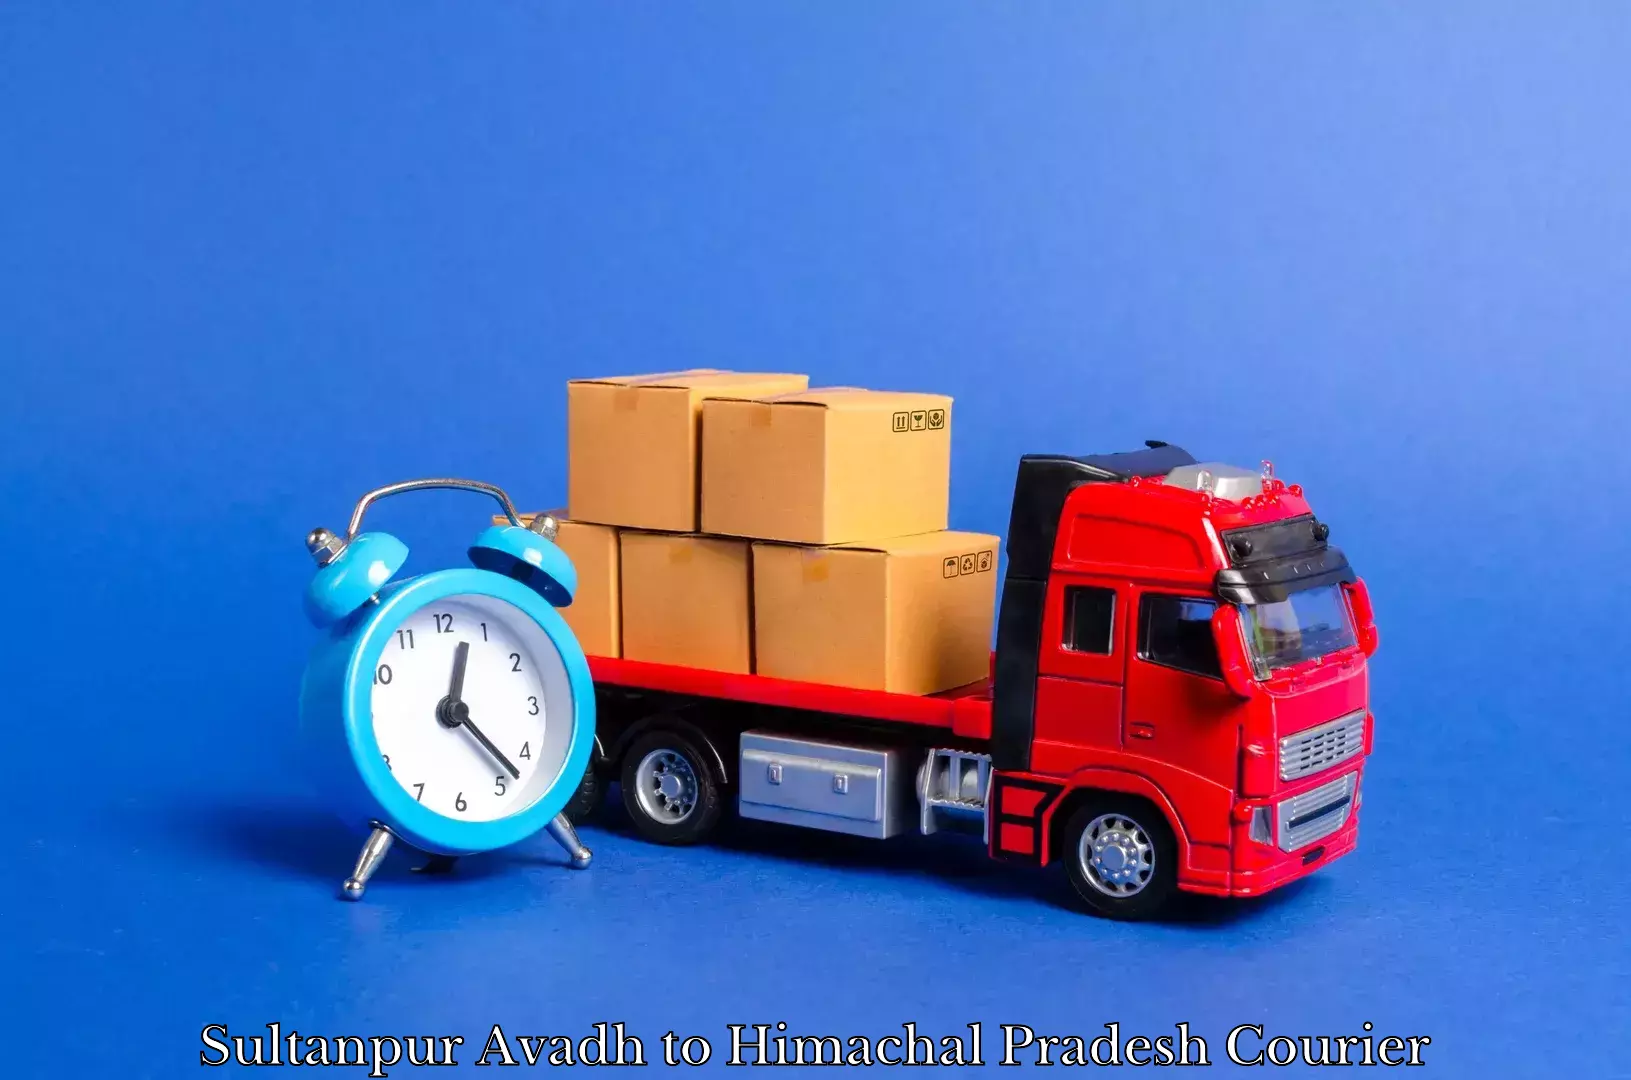 Professional moving assistance in Sultanpur Avadh to Nagwain